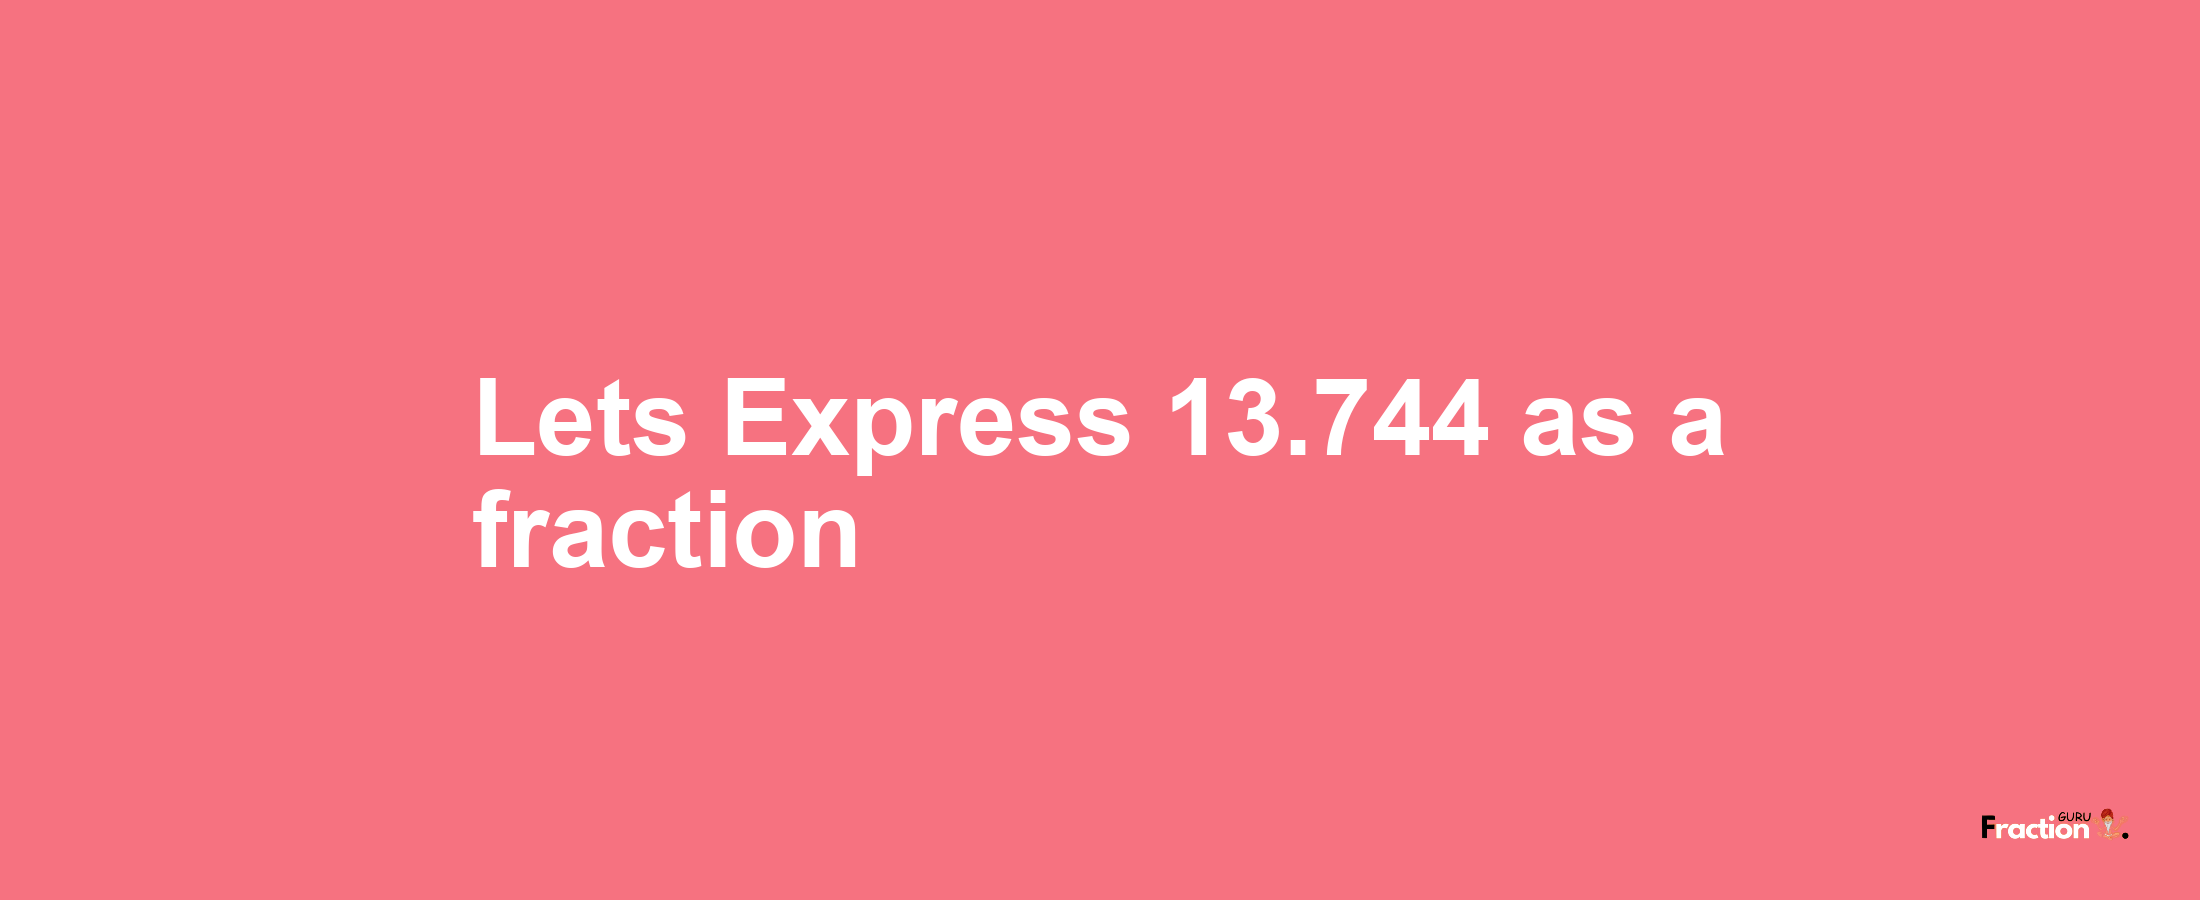 Lets Express 13.744 as afraction